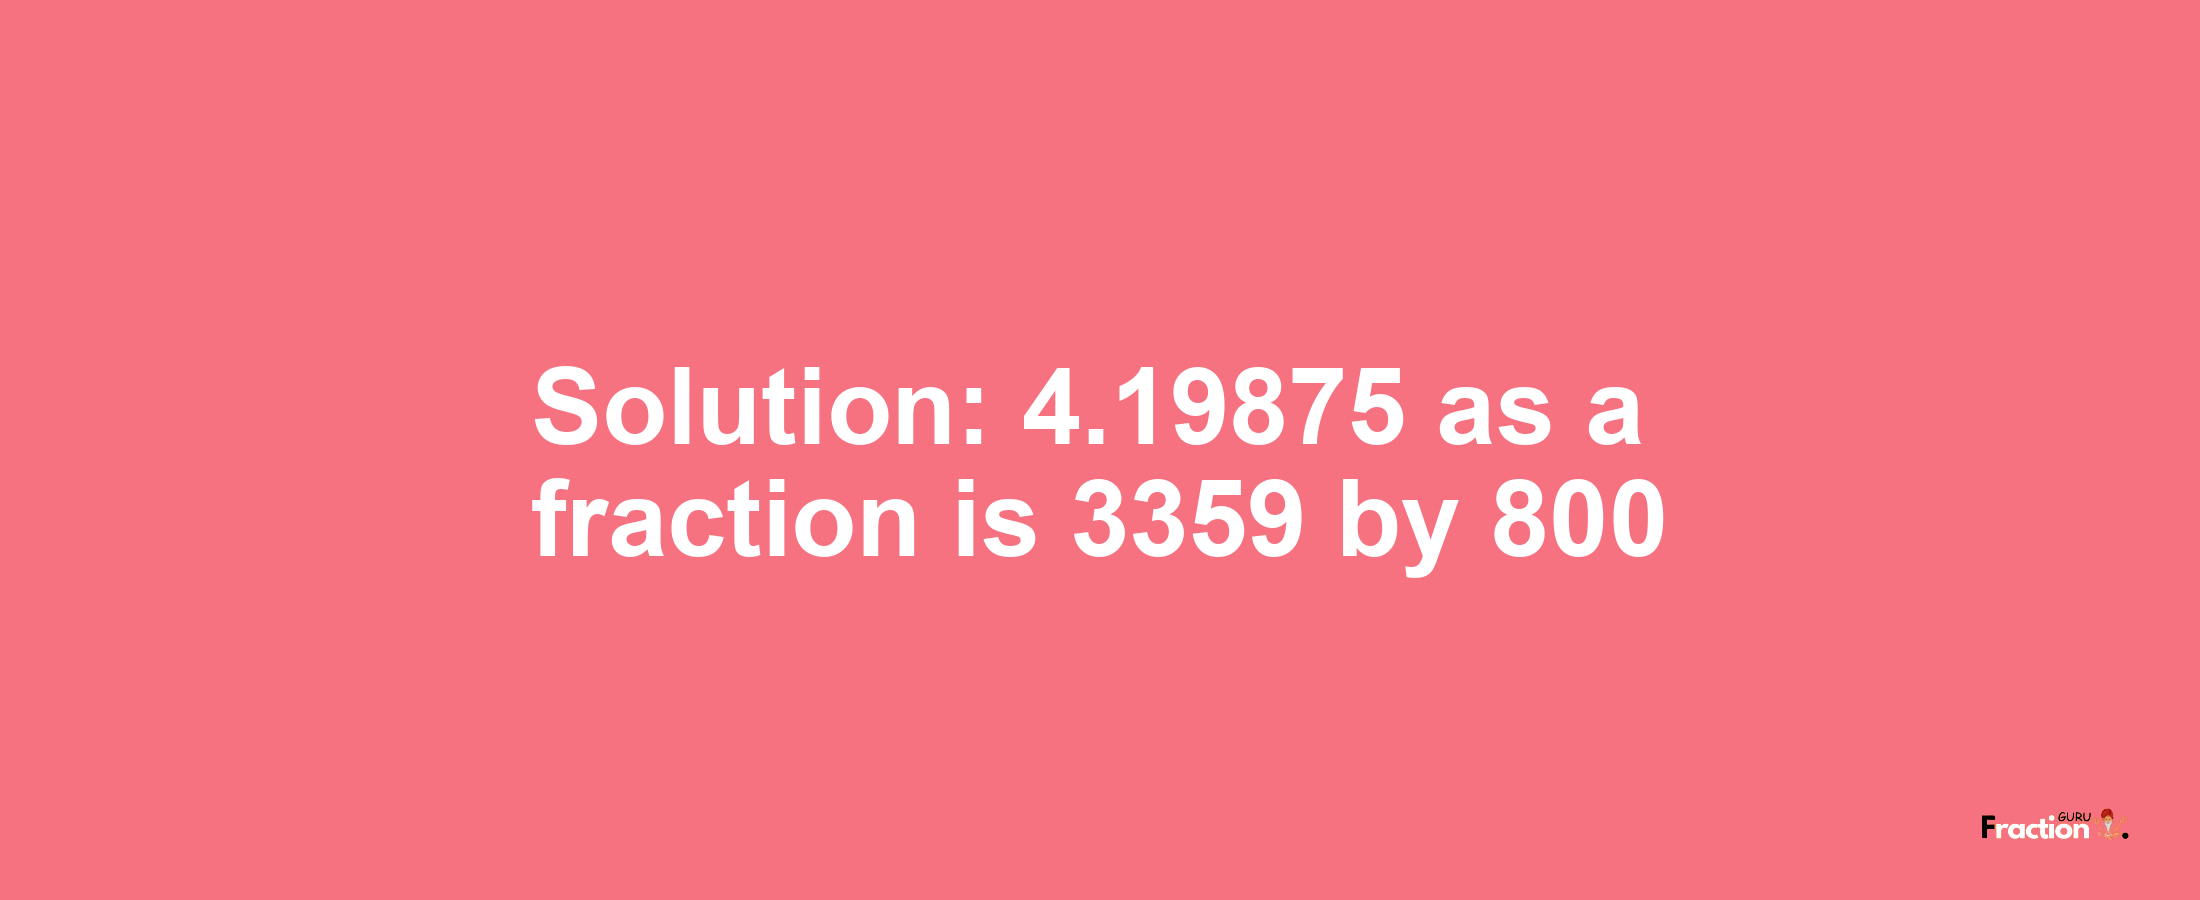 Solution:4.19875 as a fraction is 3359/800